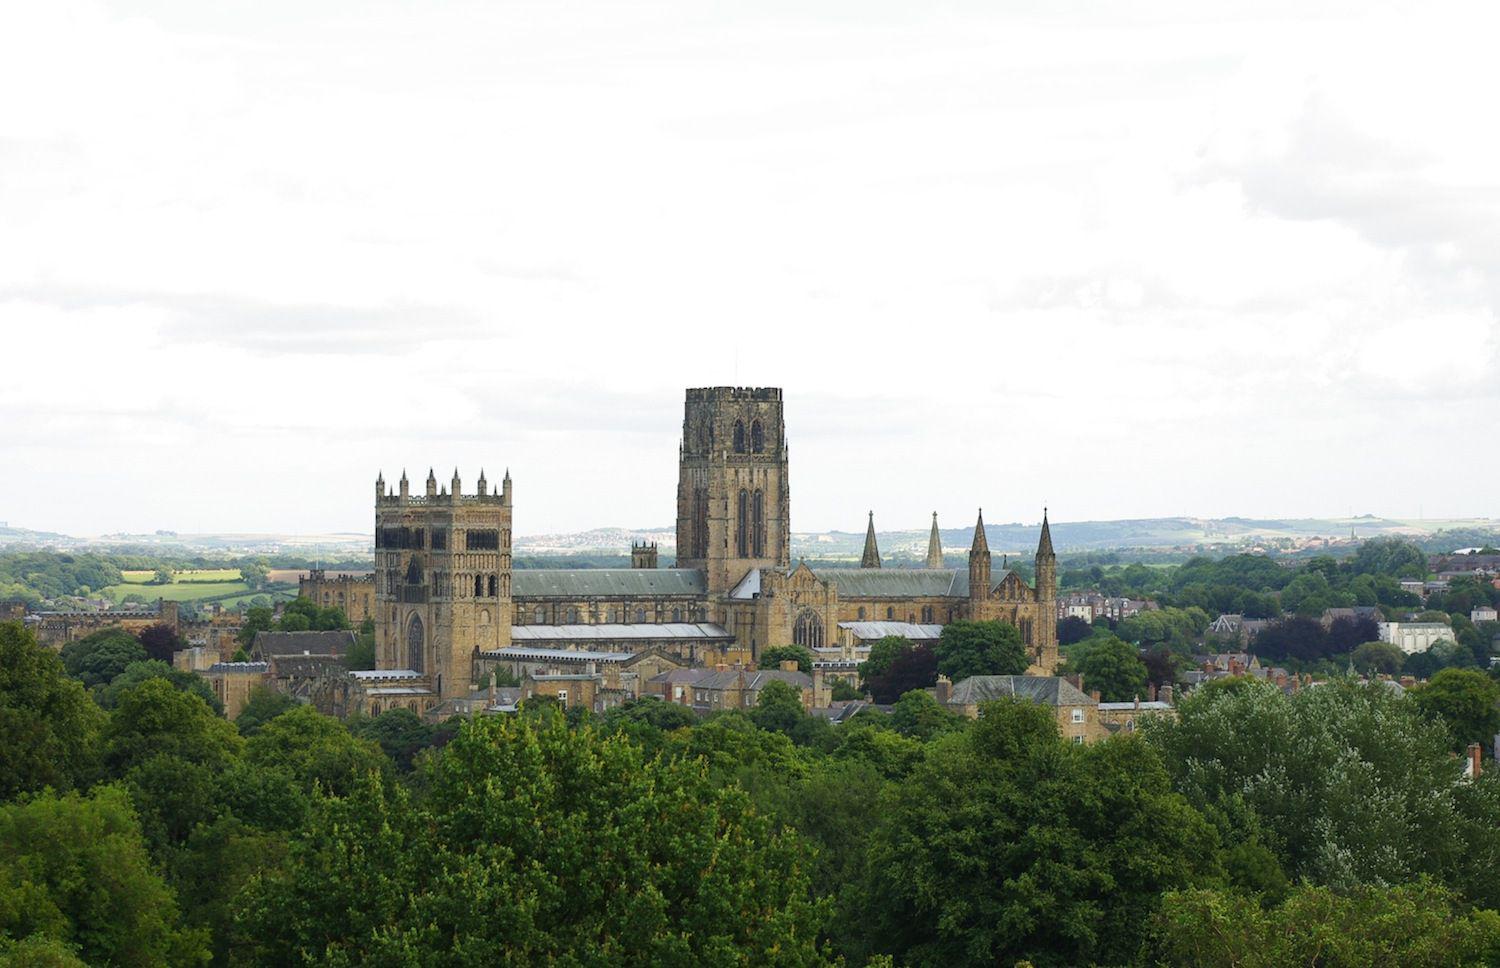 Hotels, B&Bs, Self-Catering & Glamping in Durham